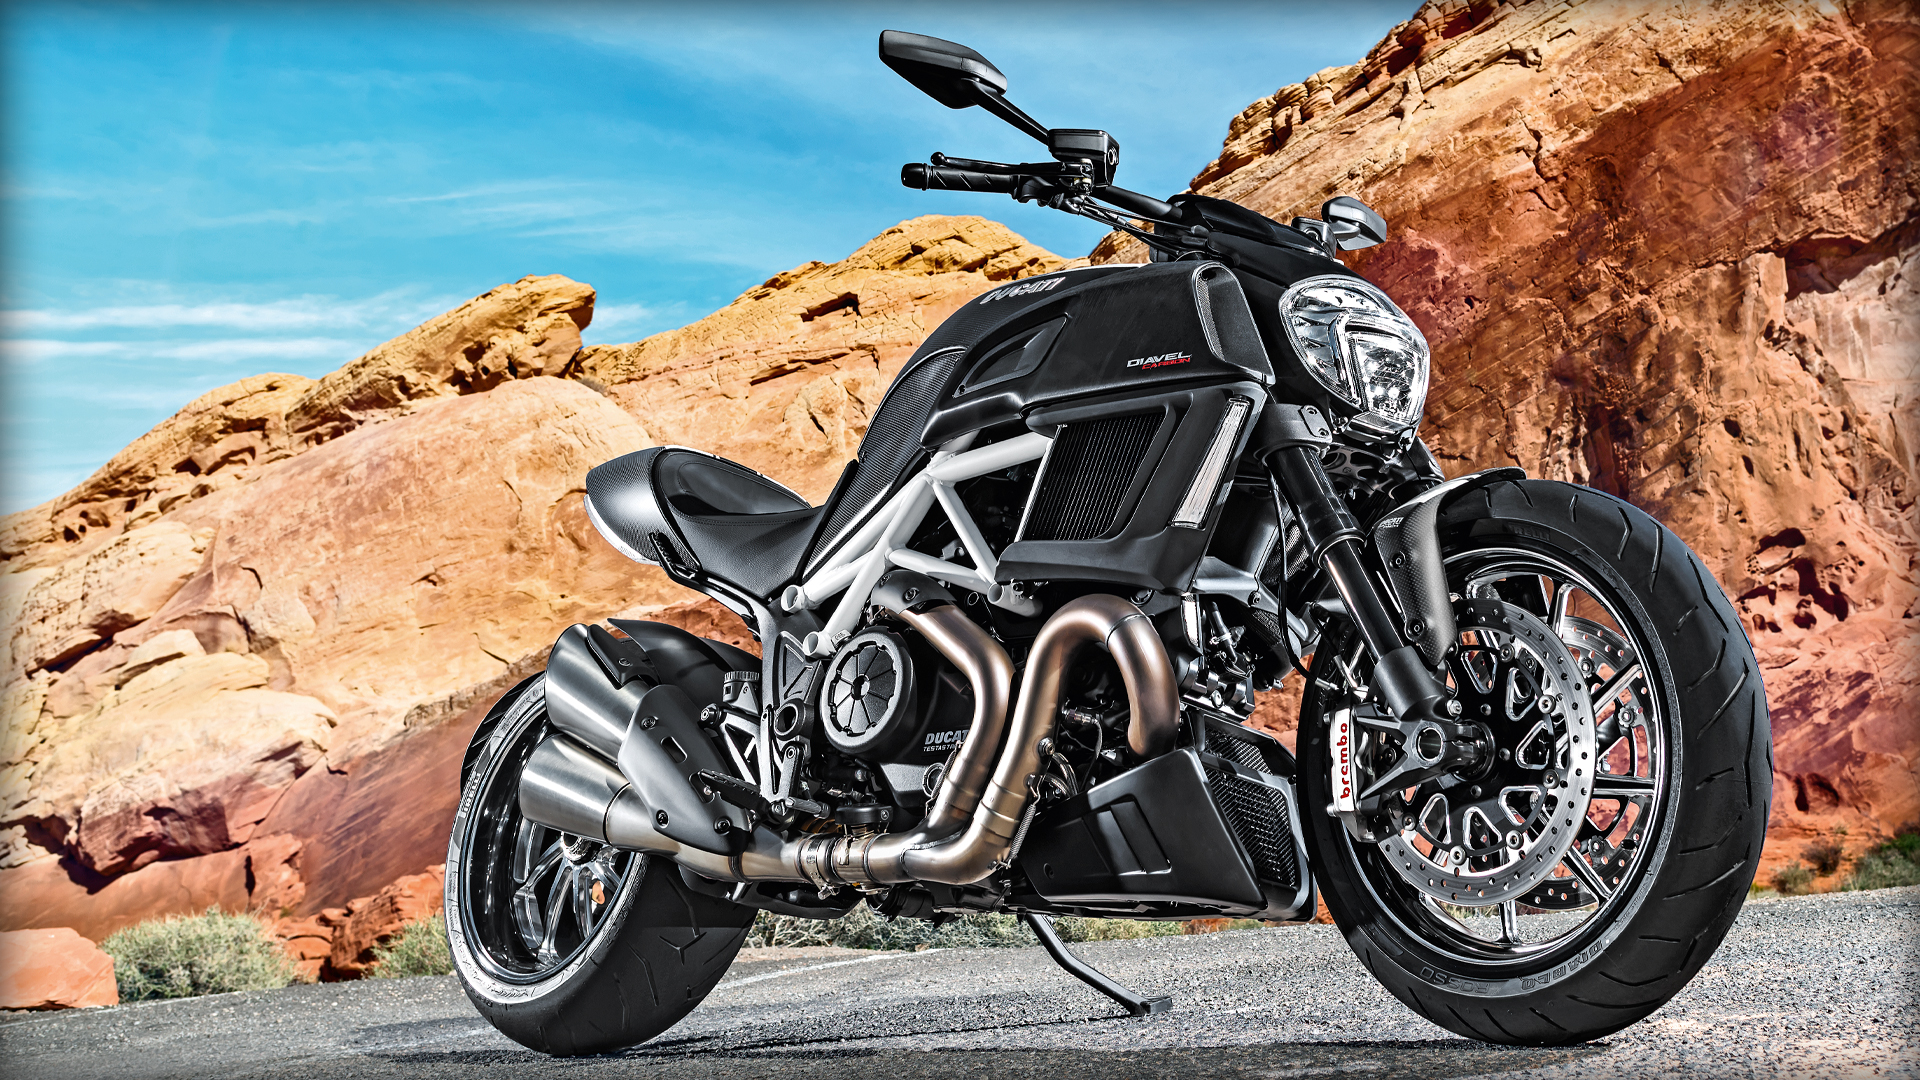 Ducati Diavel Wallpaper Image Photos Pictures Background